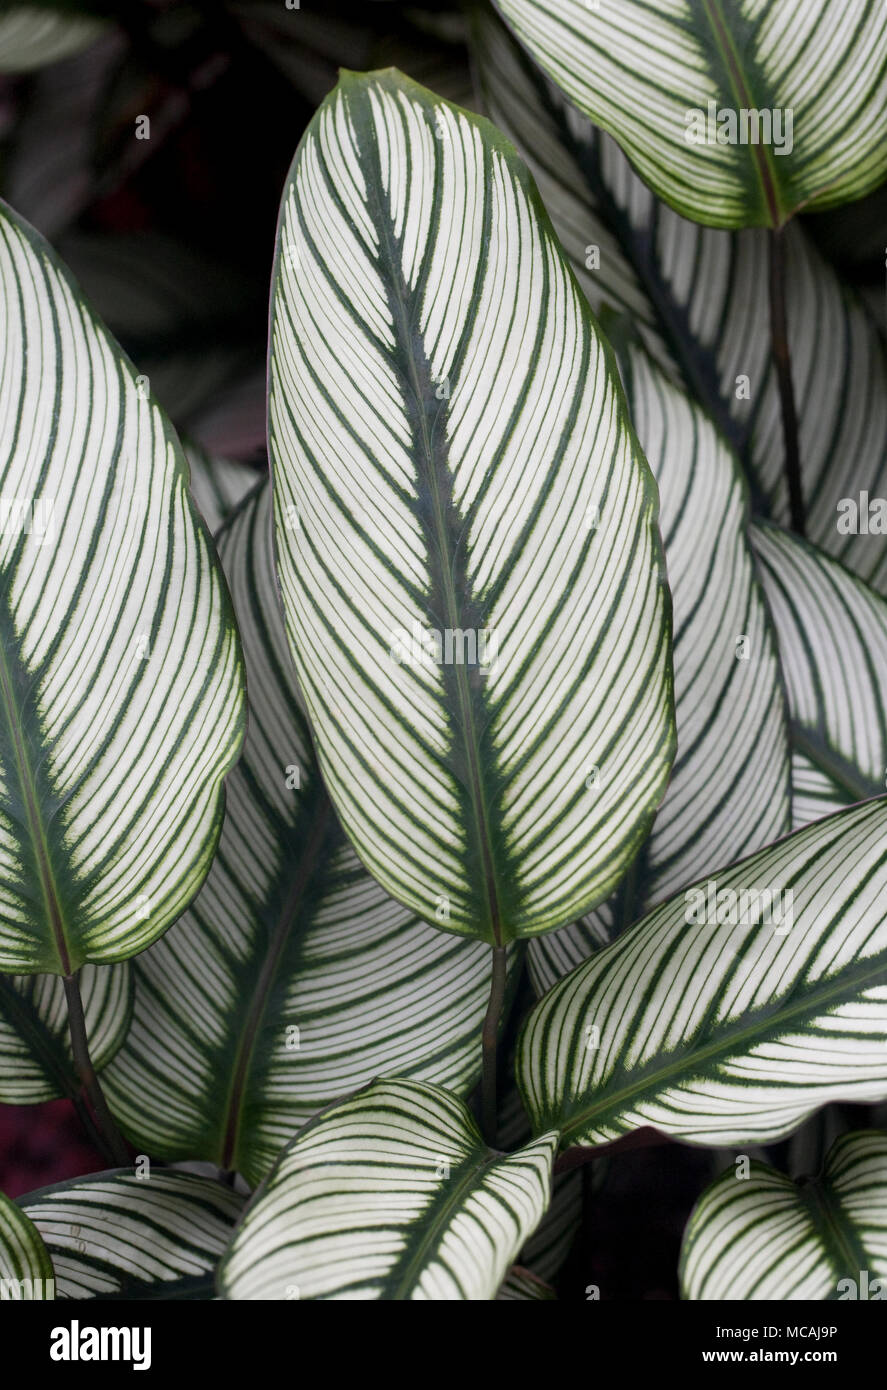 Calathea 'White Star' leaves growing in a protected environment. Zebra plant leaves Stock Photo